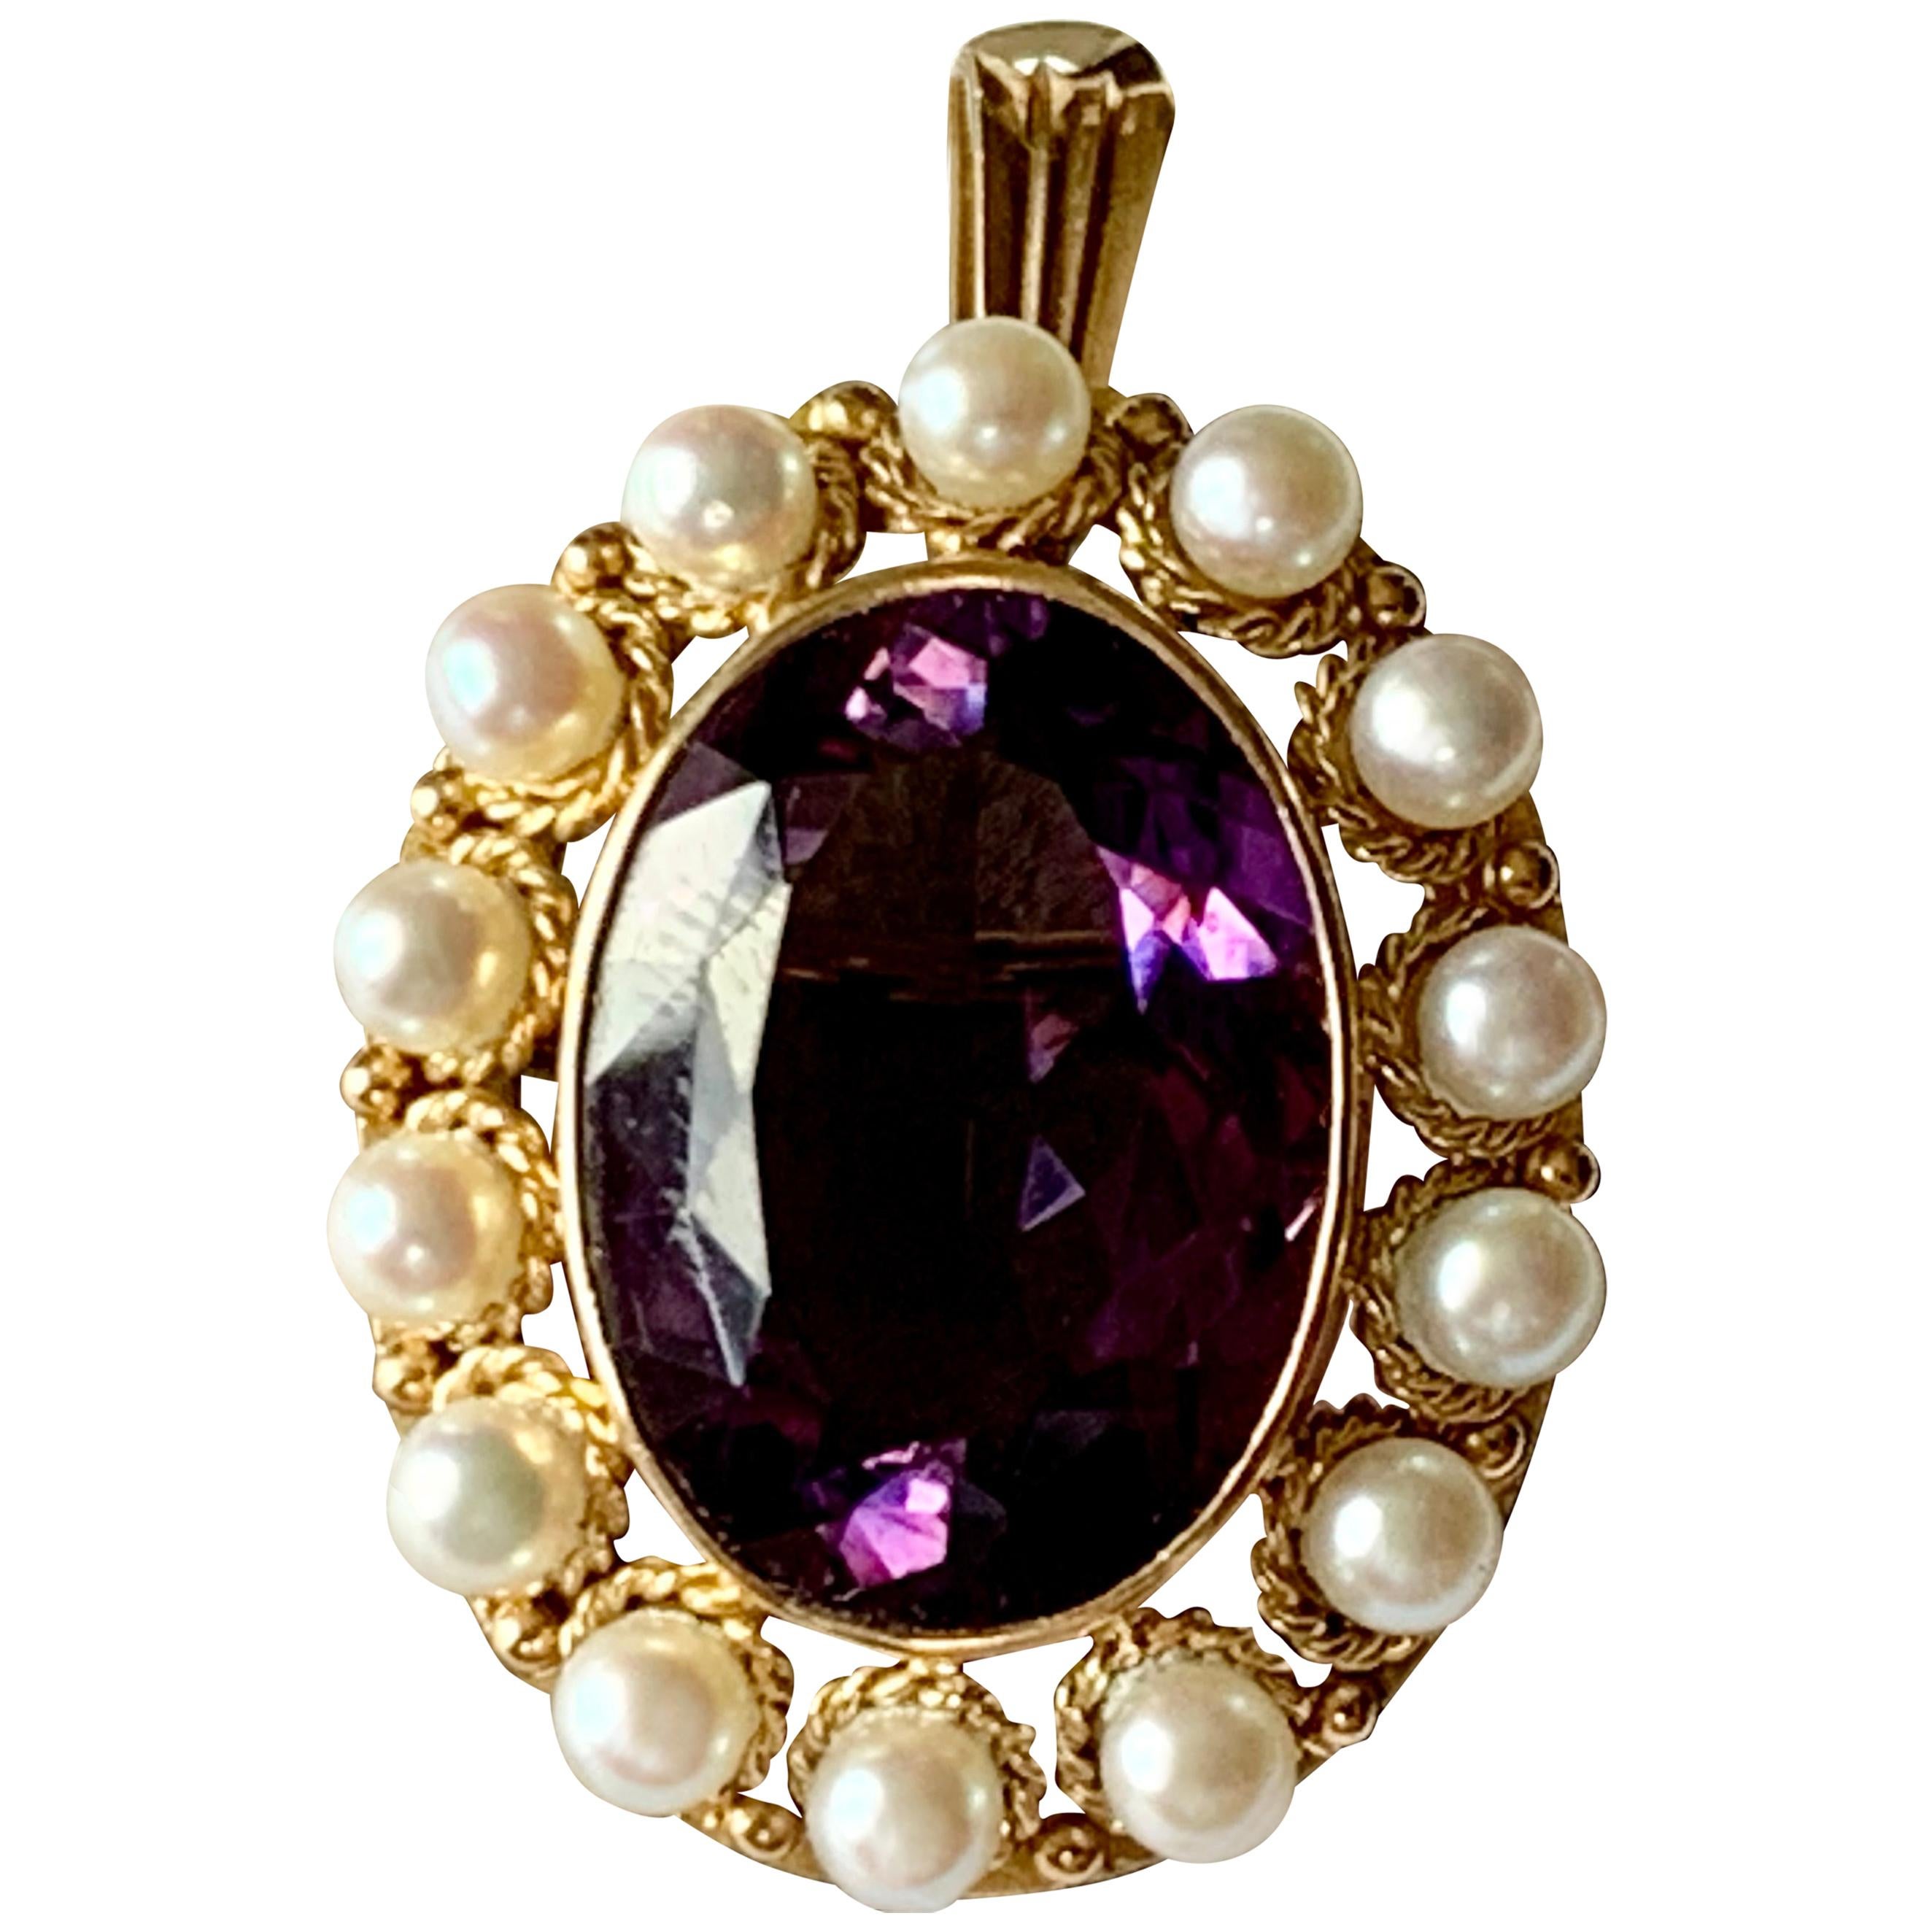 Vintage 18 K Yellow Gold Victorian Inspired Brooch/Pendant Amethyst and Pearls For Sale